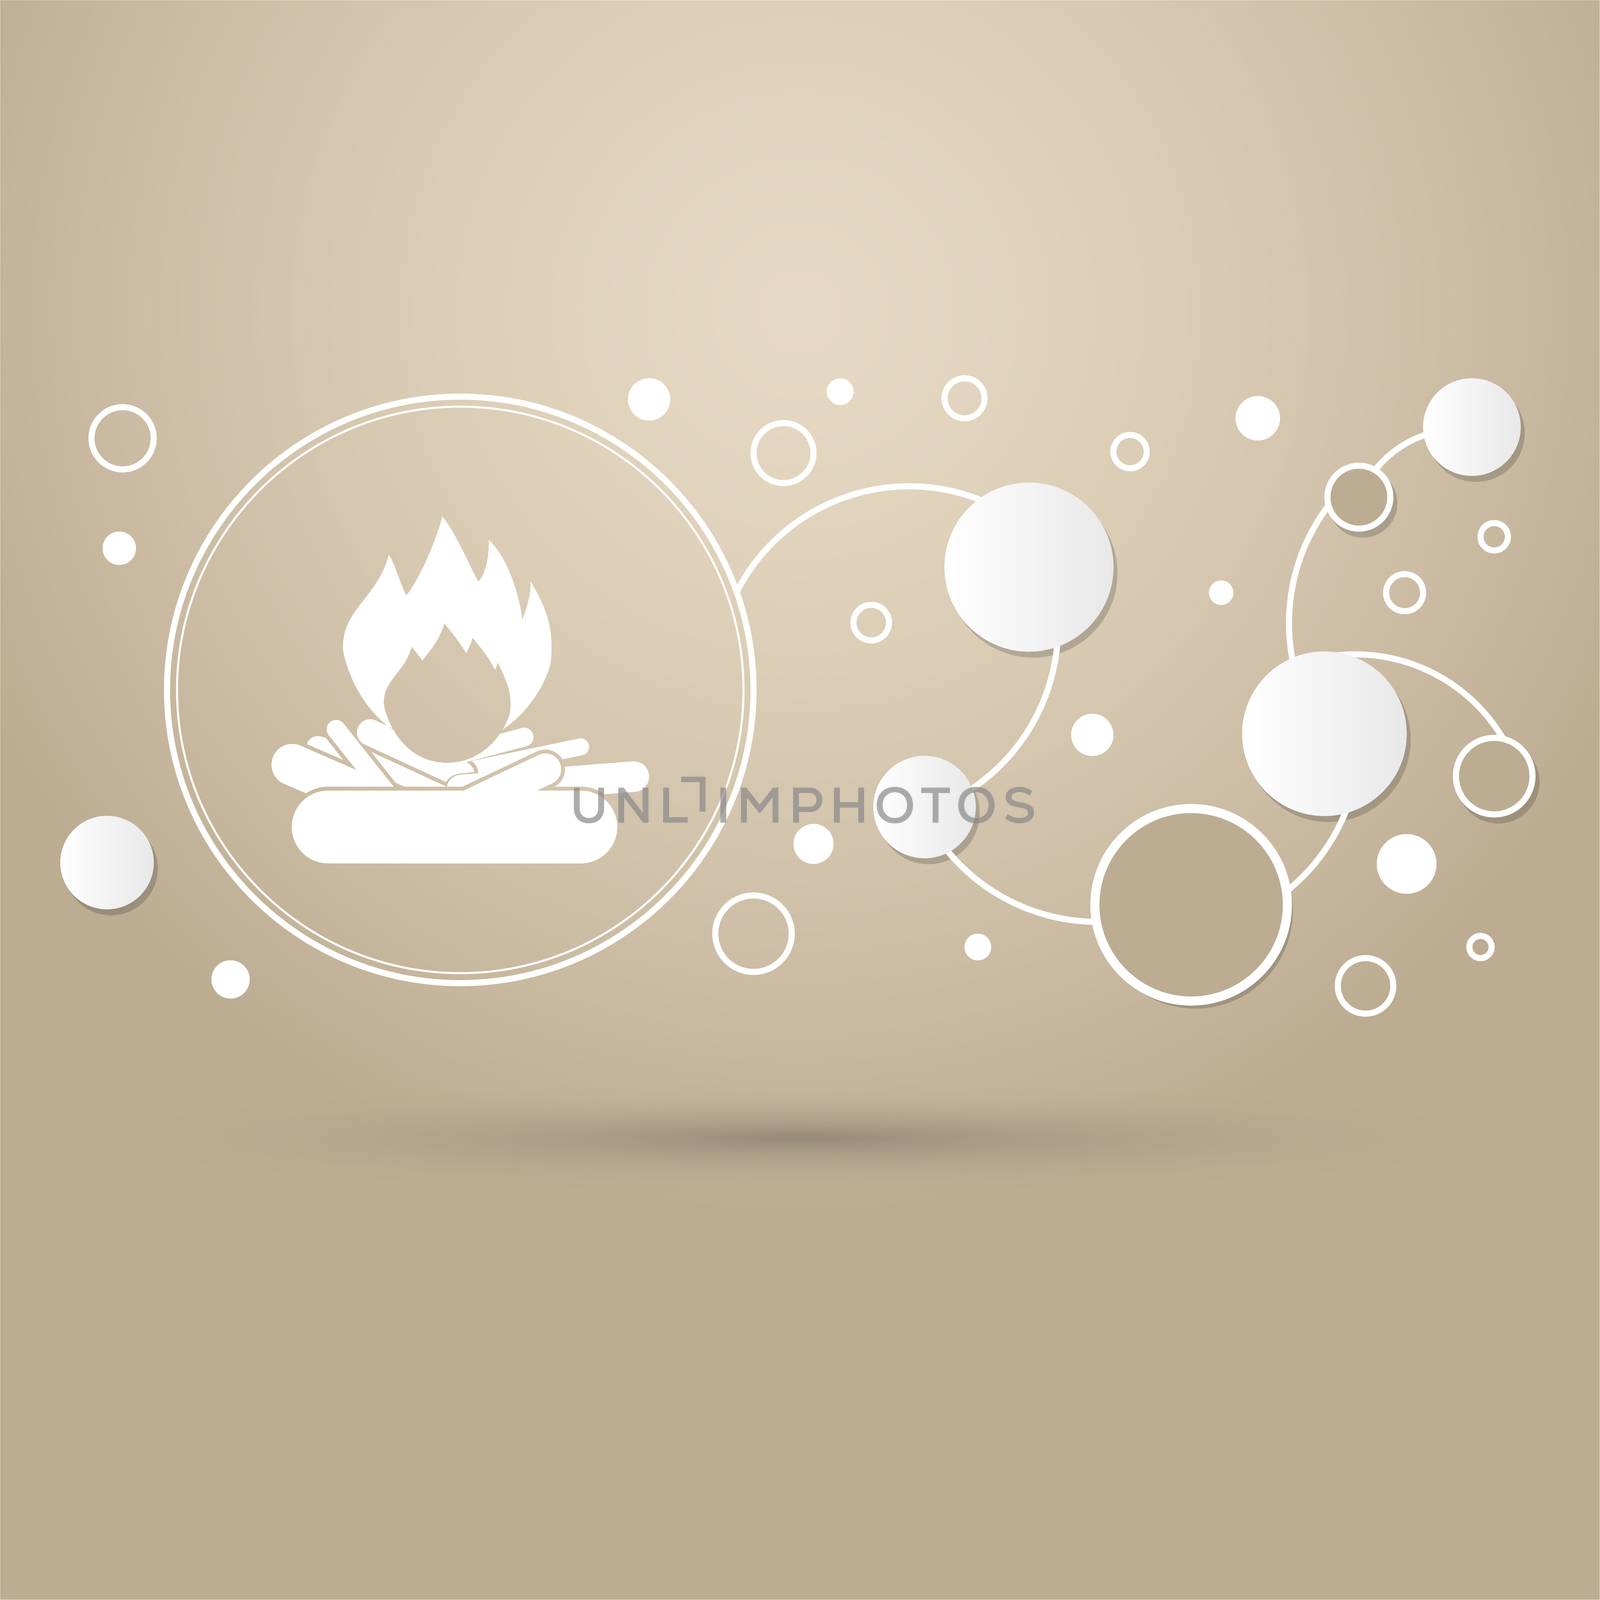 Fire Icon on a brown background with elegant style and modern design infographic.  by Adamchuk